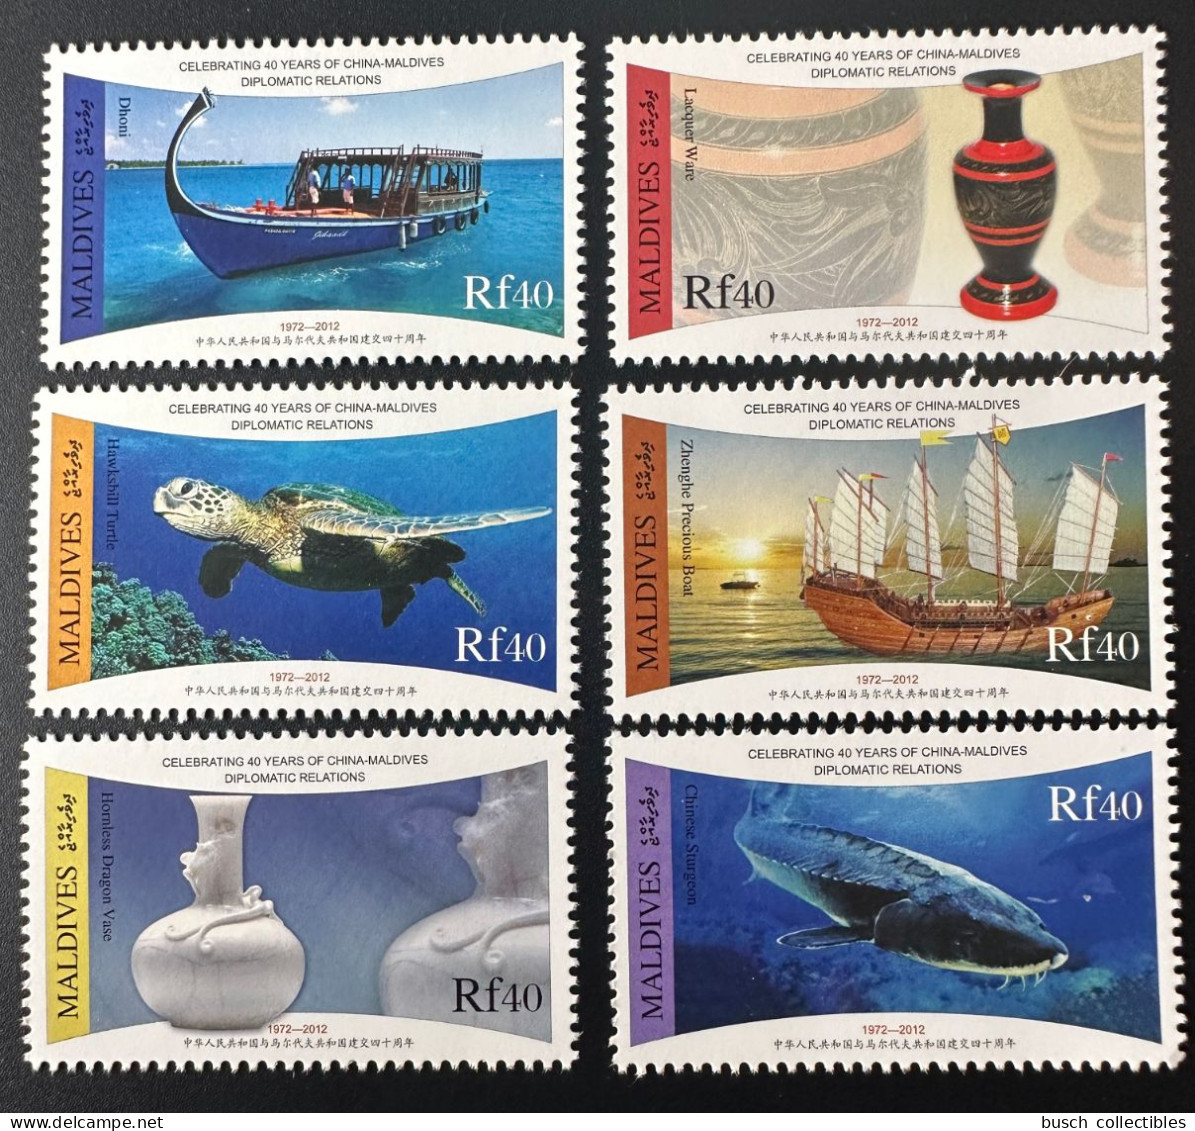 Maldives 2012 / 2013 Mi. 4837 - 4842 Diplomatic Relations China Chine 40 Years Tortue Turtle Poisson Fish Boat Bateau - Unused Stamps